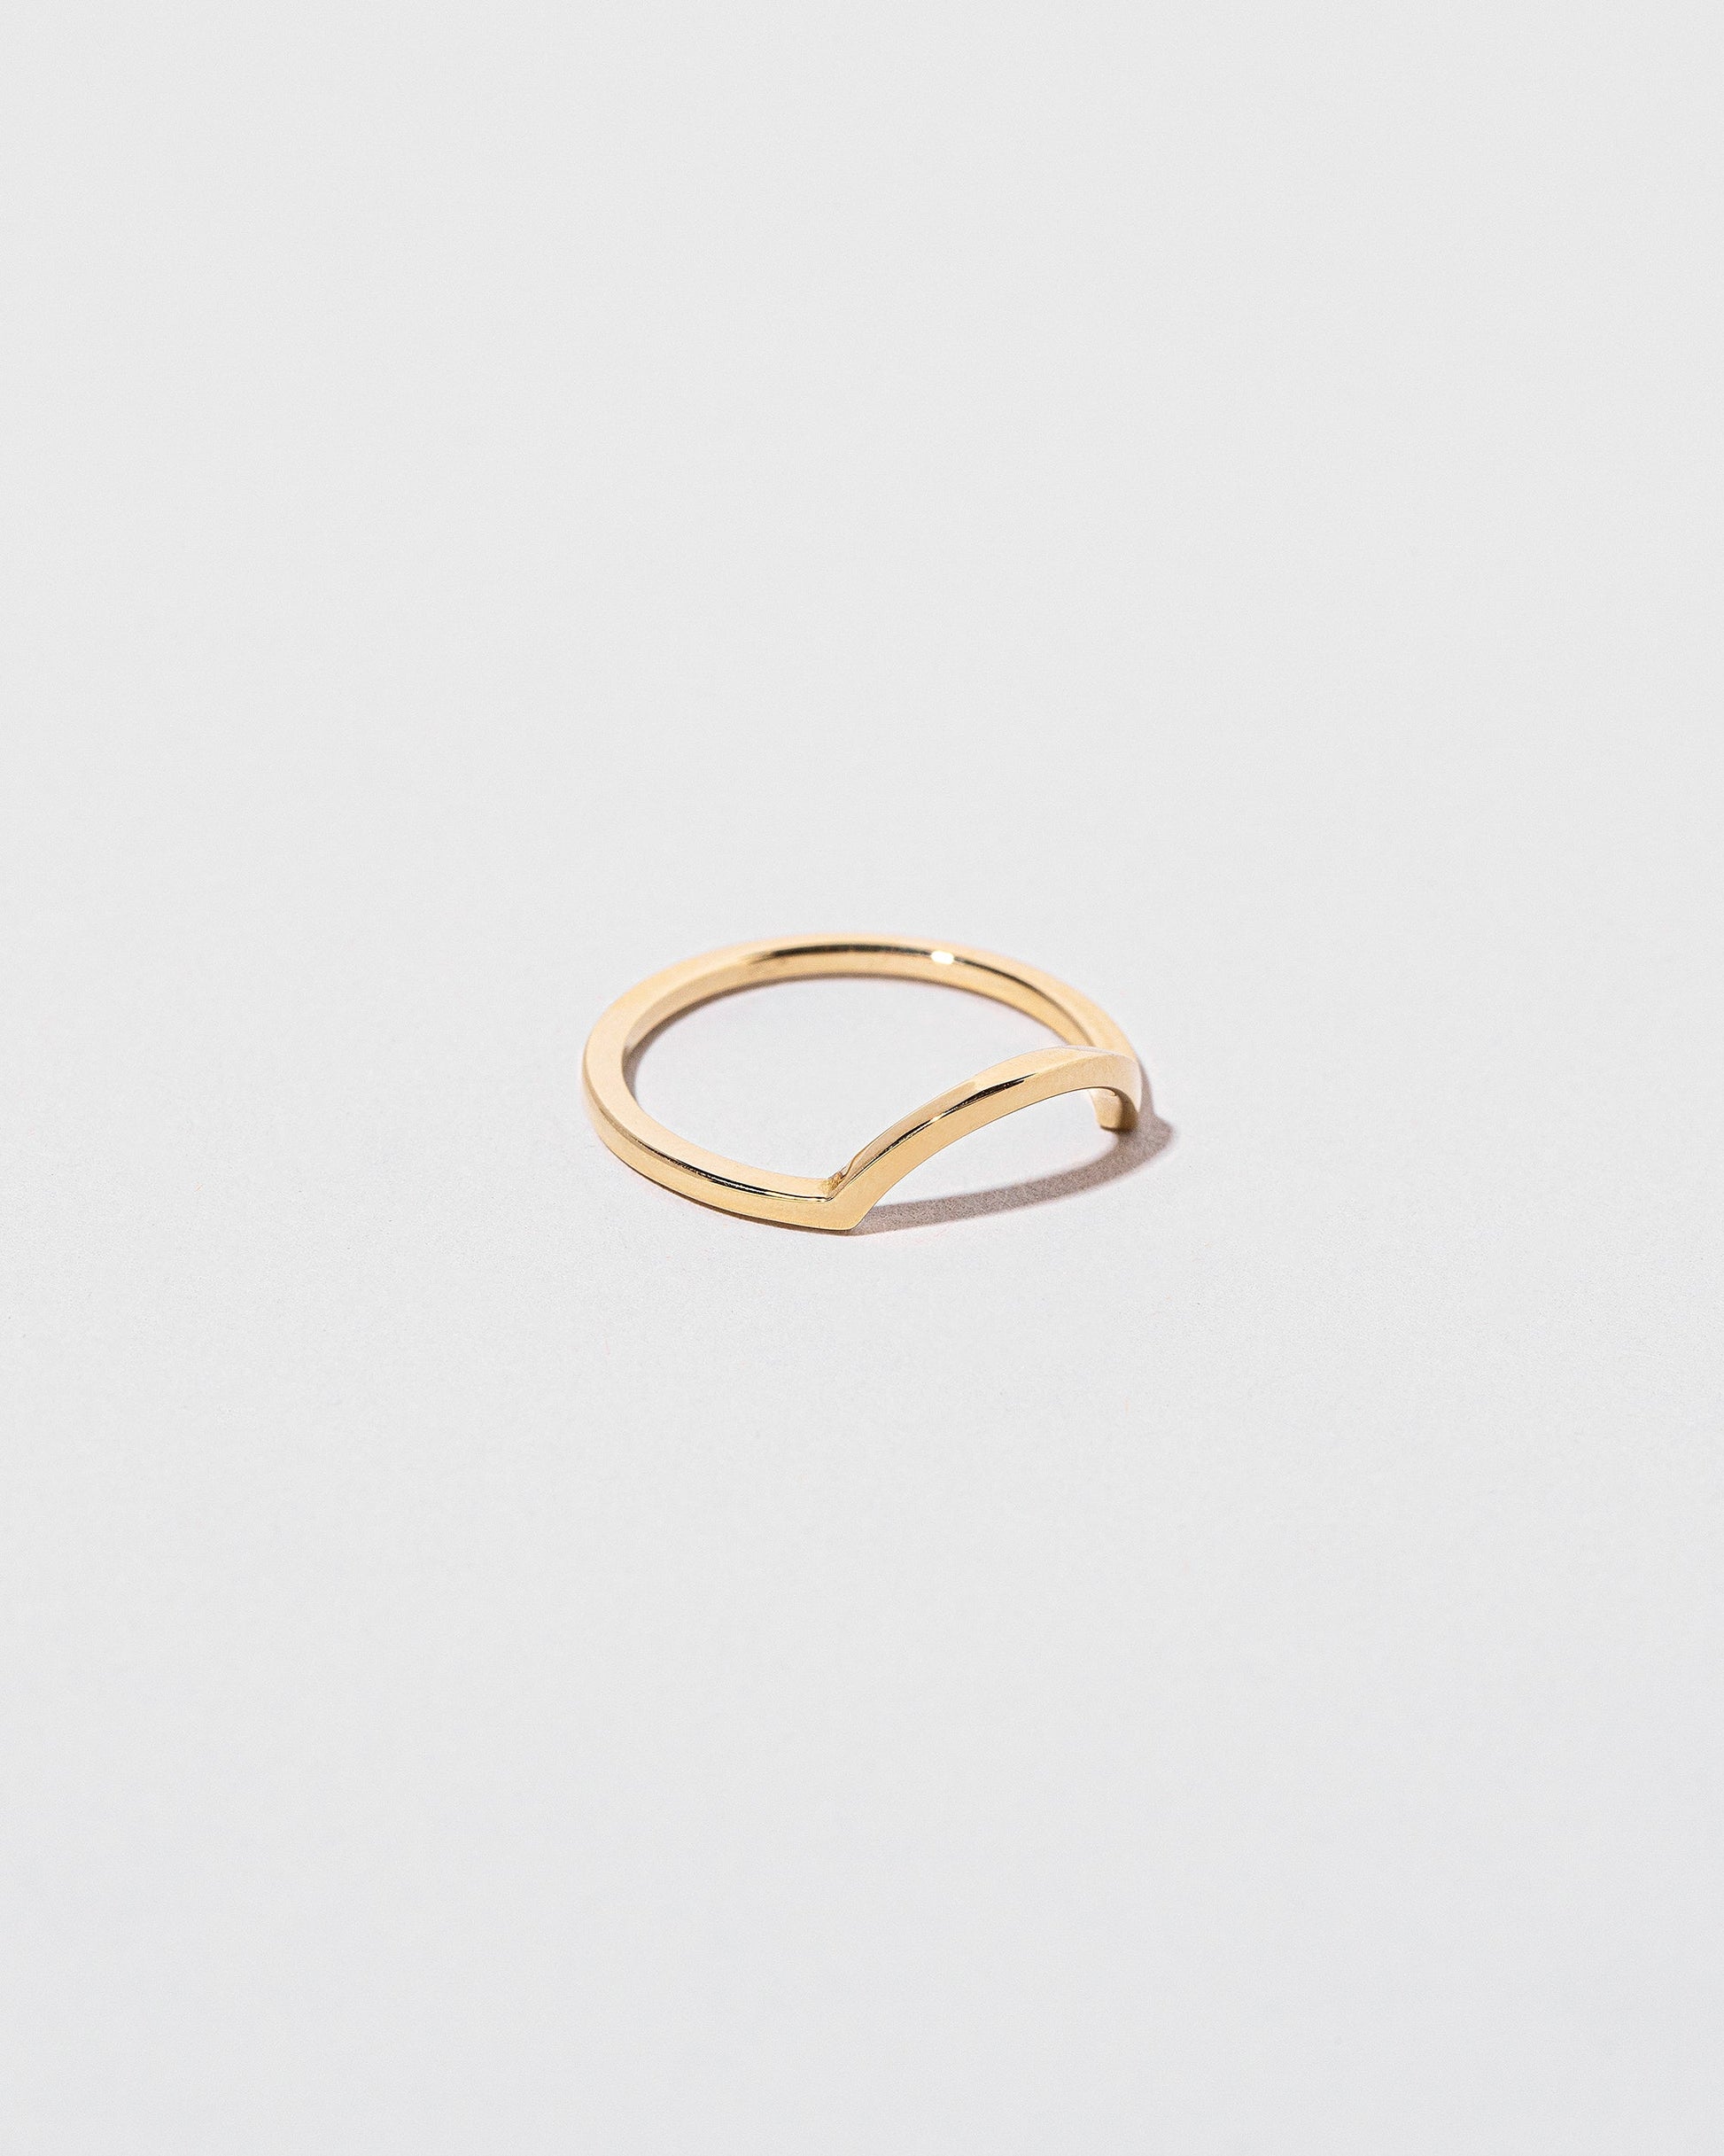 View from the side of the Gold Square Wire Curve Band on light color background.